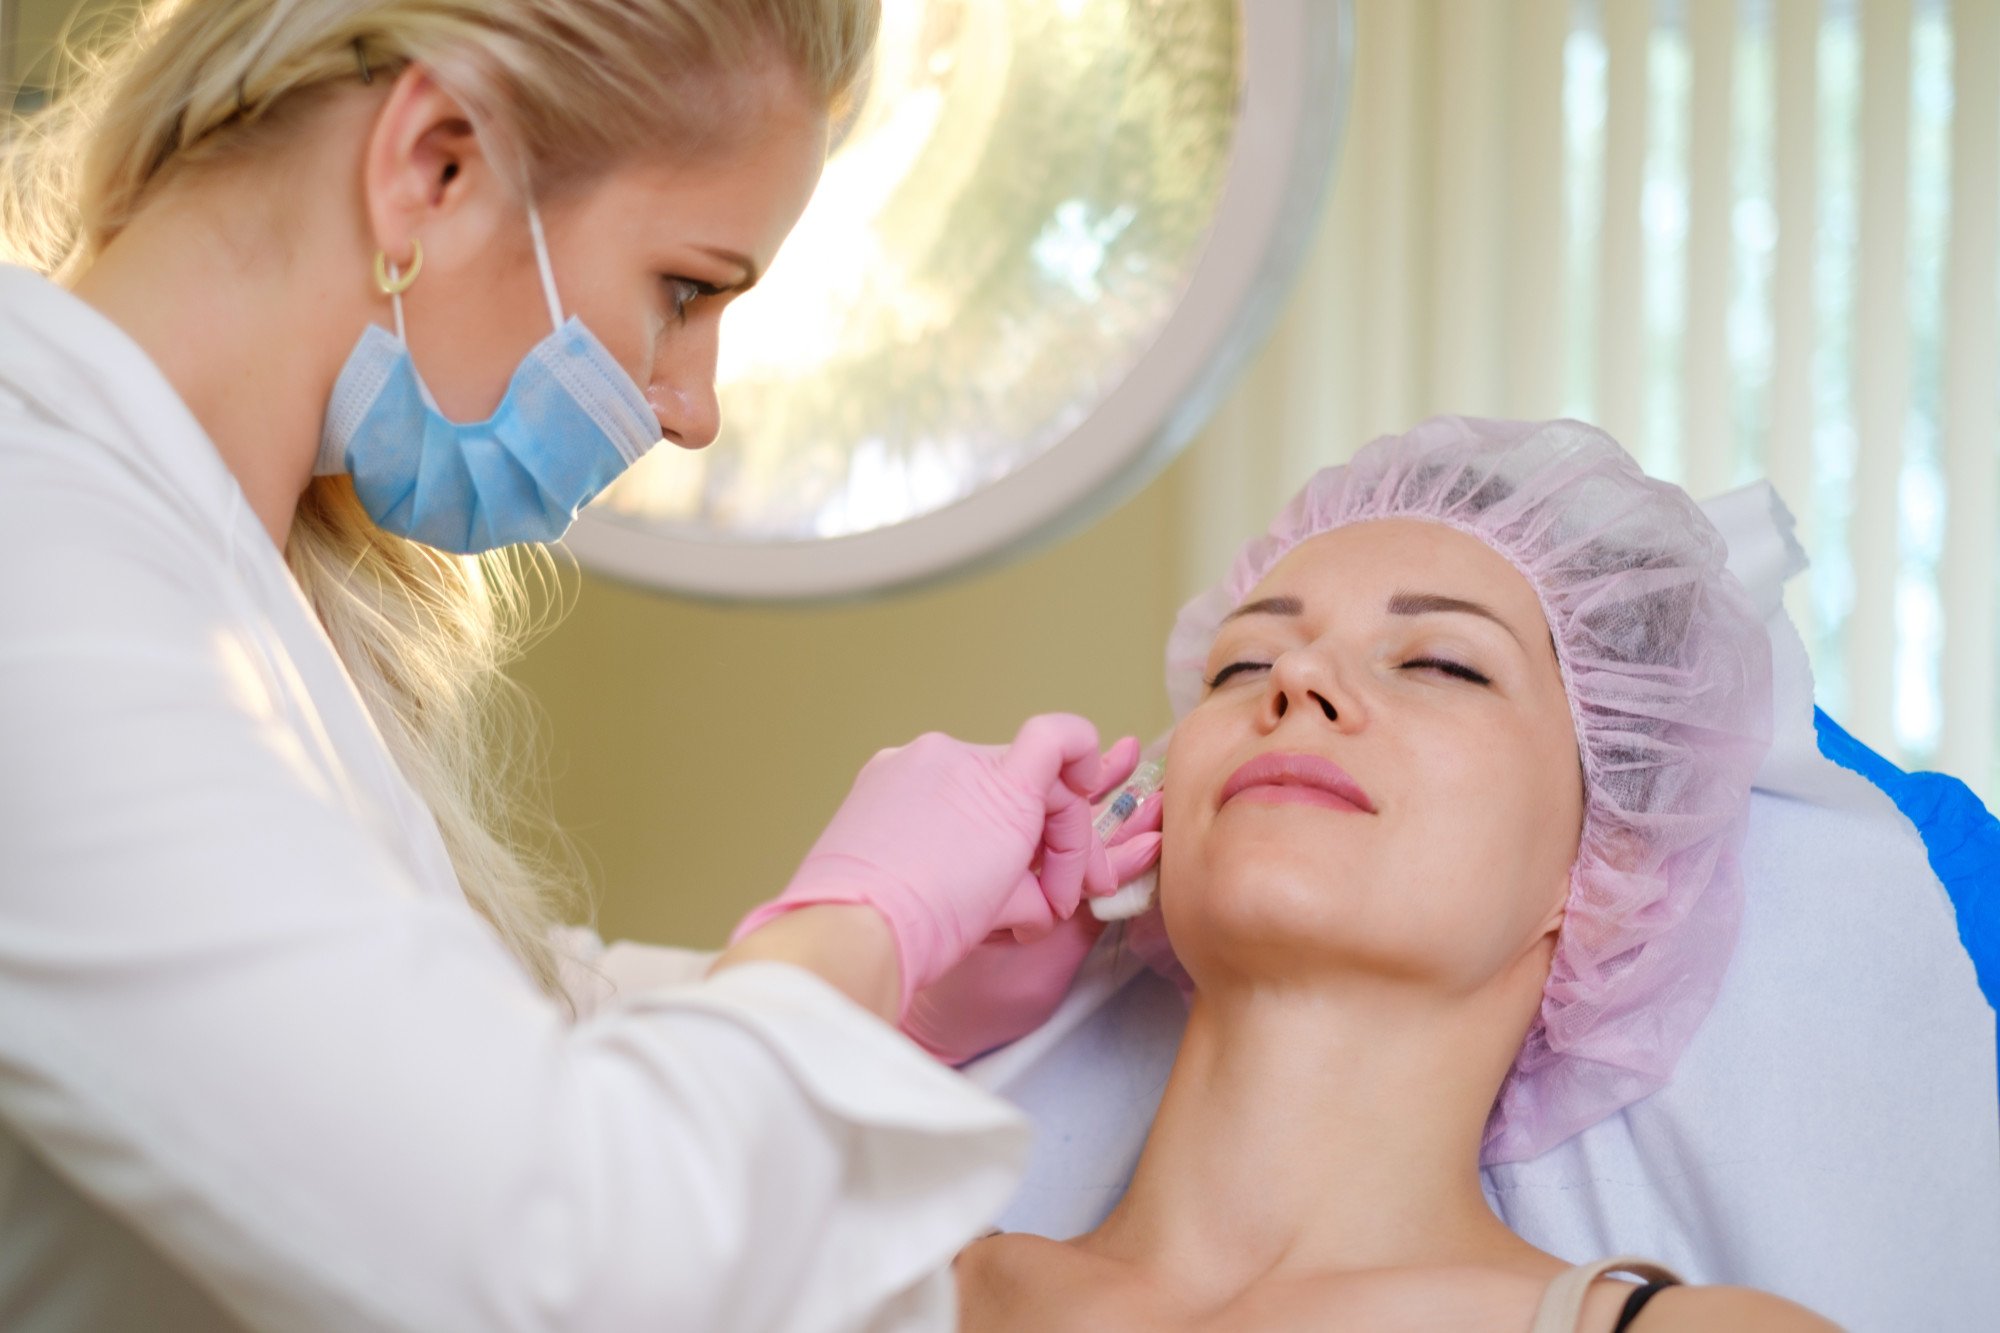 What is a mini facelift procedure? Learn more about this procedure here and understand whether it is the best procedure for you.